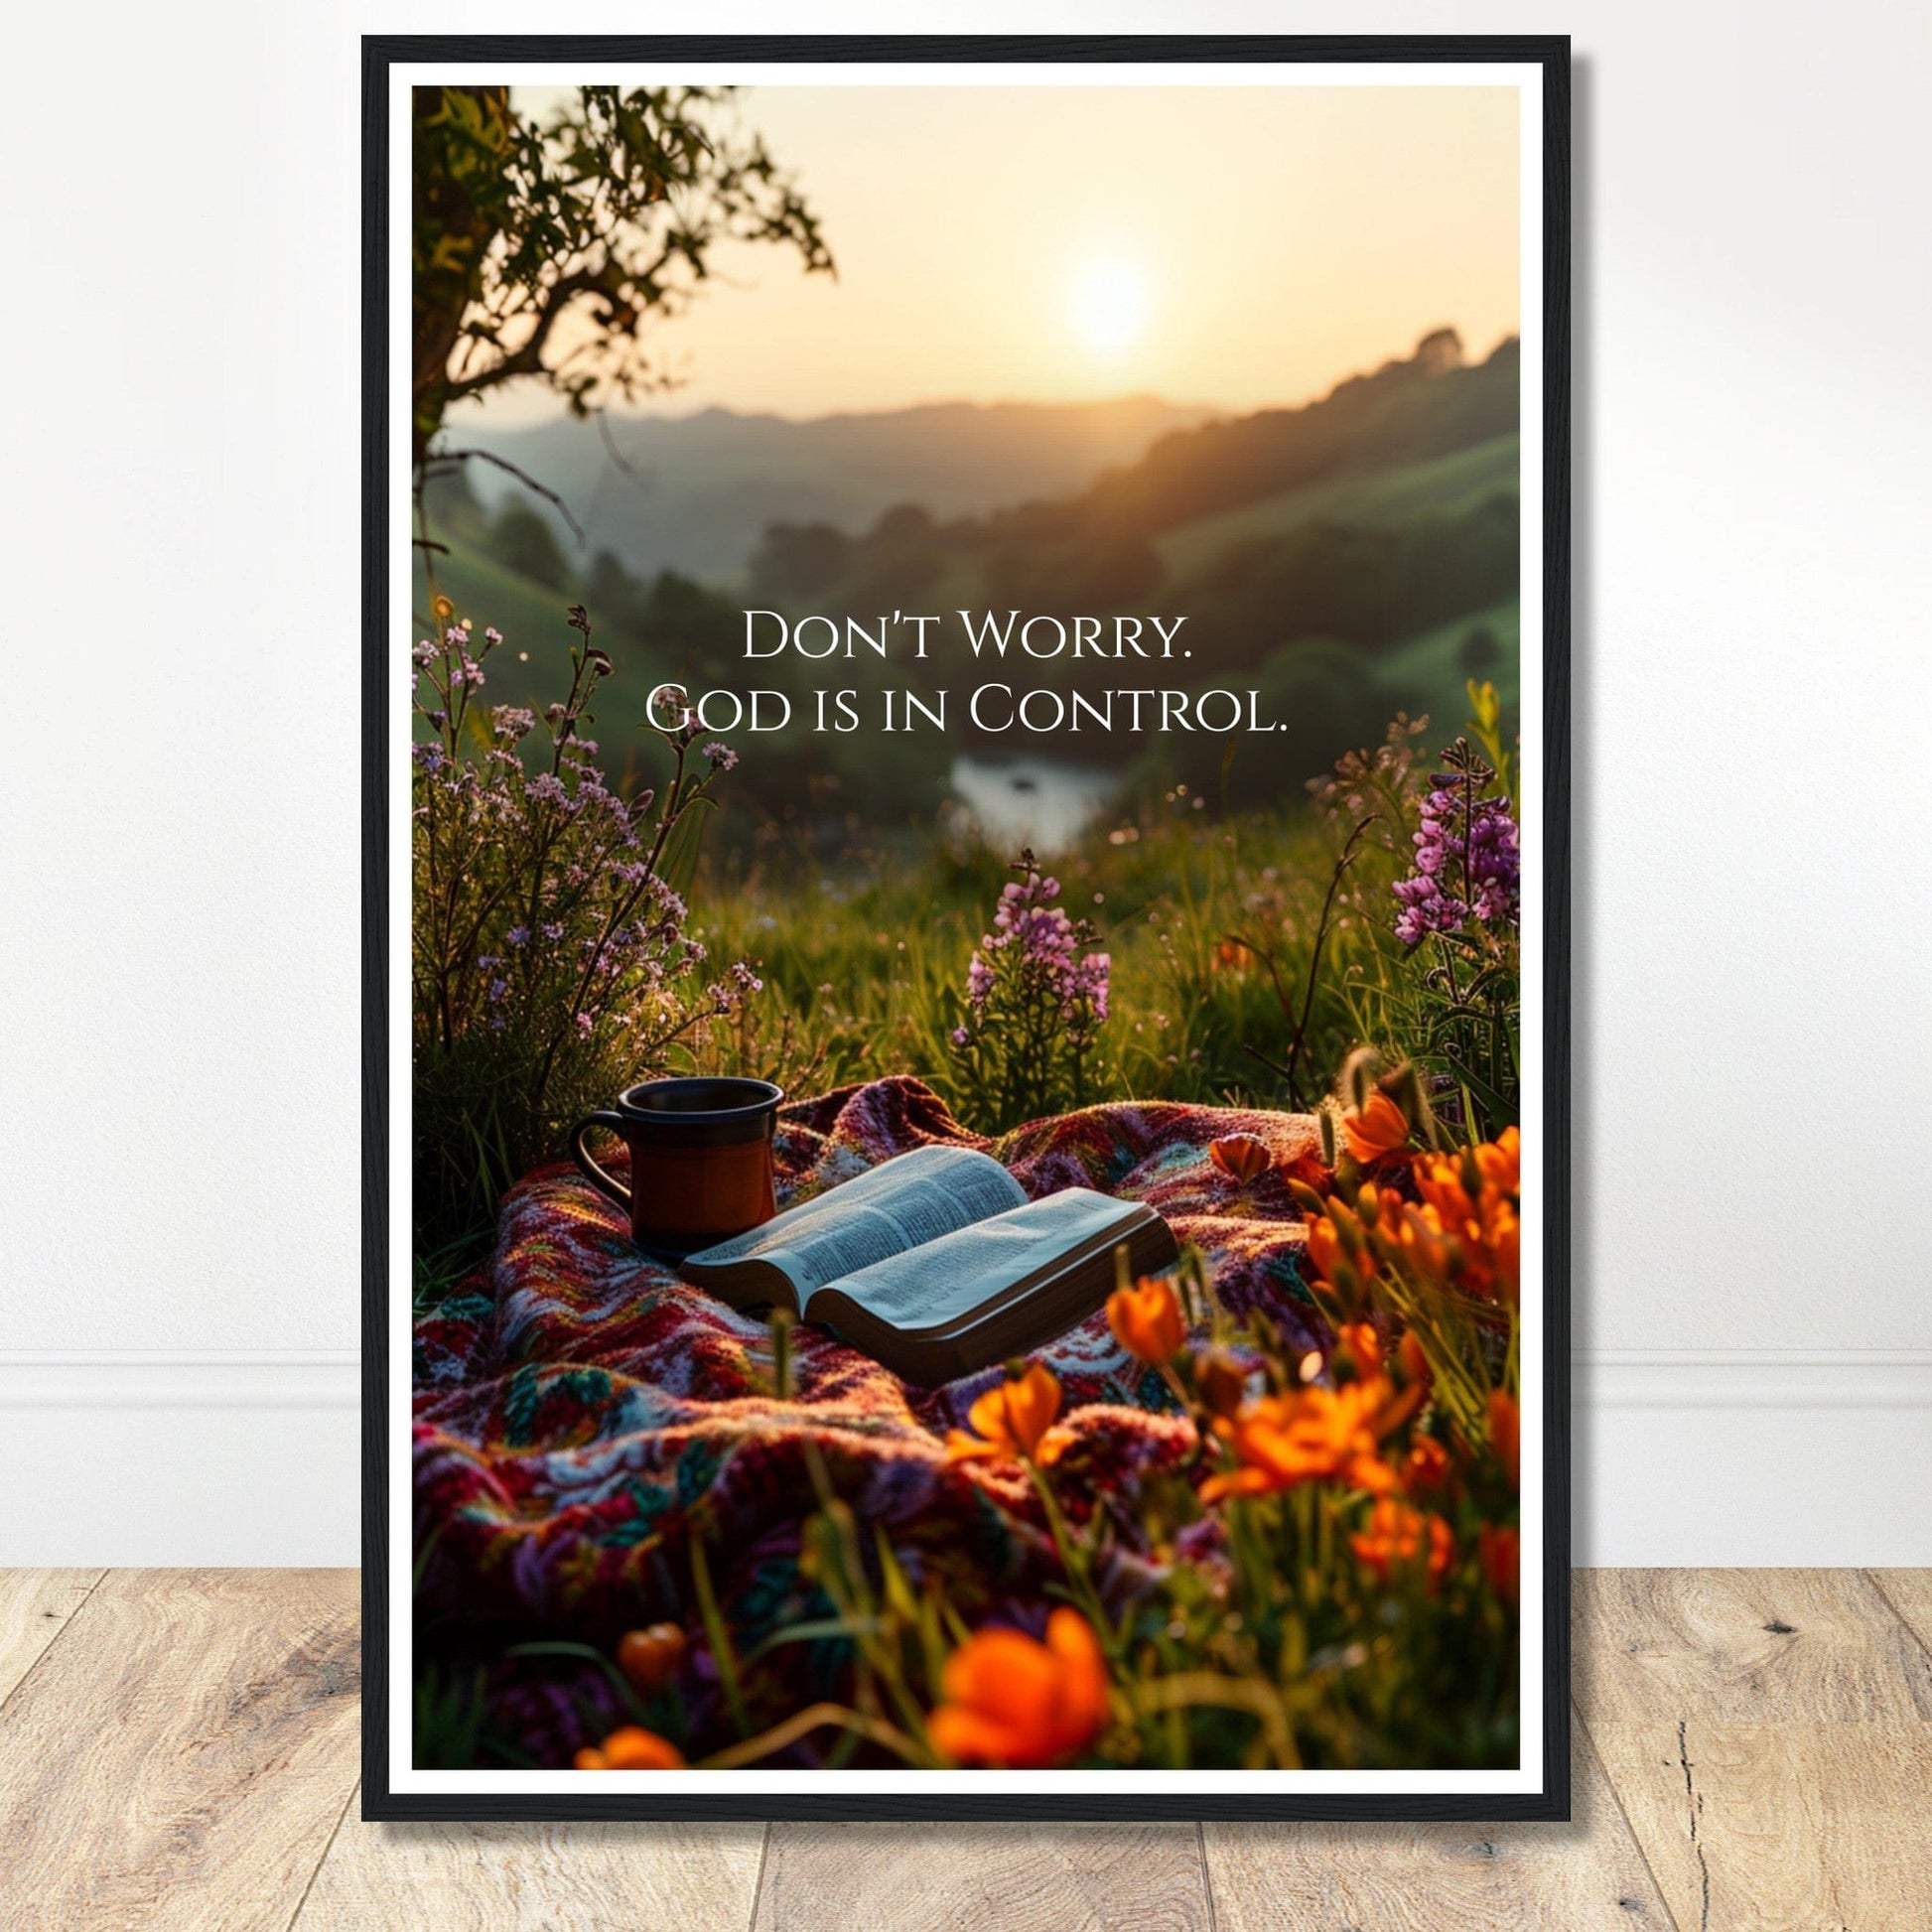 Coffee With My Father Print Material 60x90 cm / 24x36″ / Black frame Premium Matte Paper Wooden Framed Poster